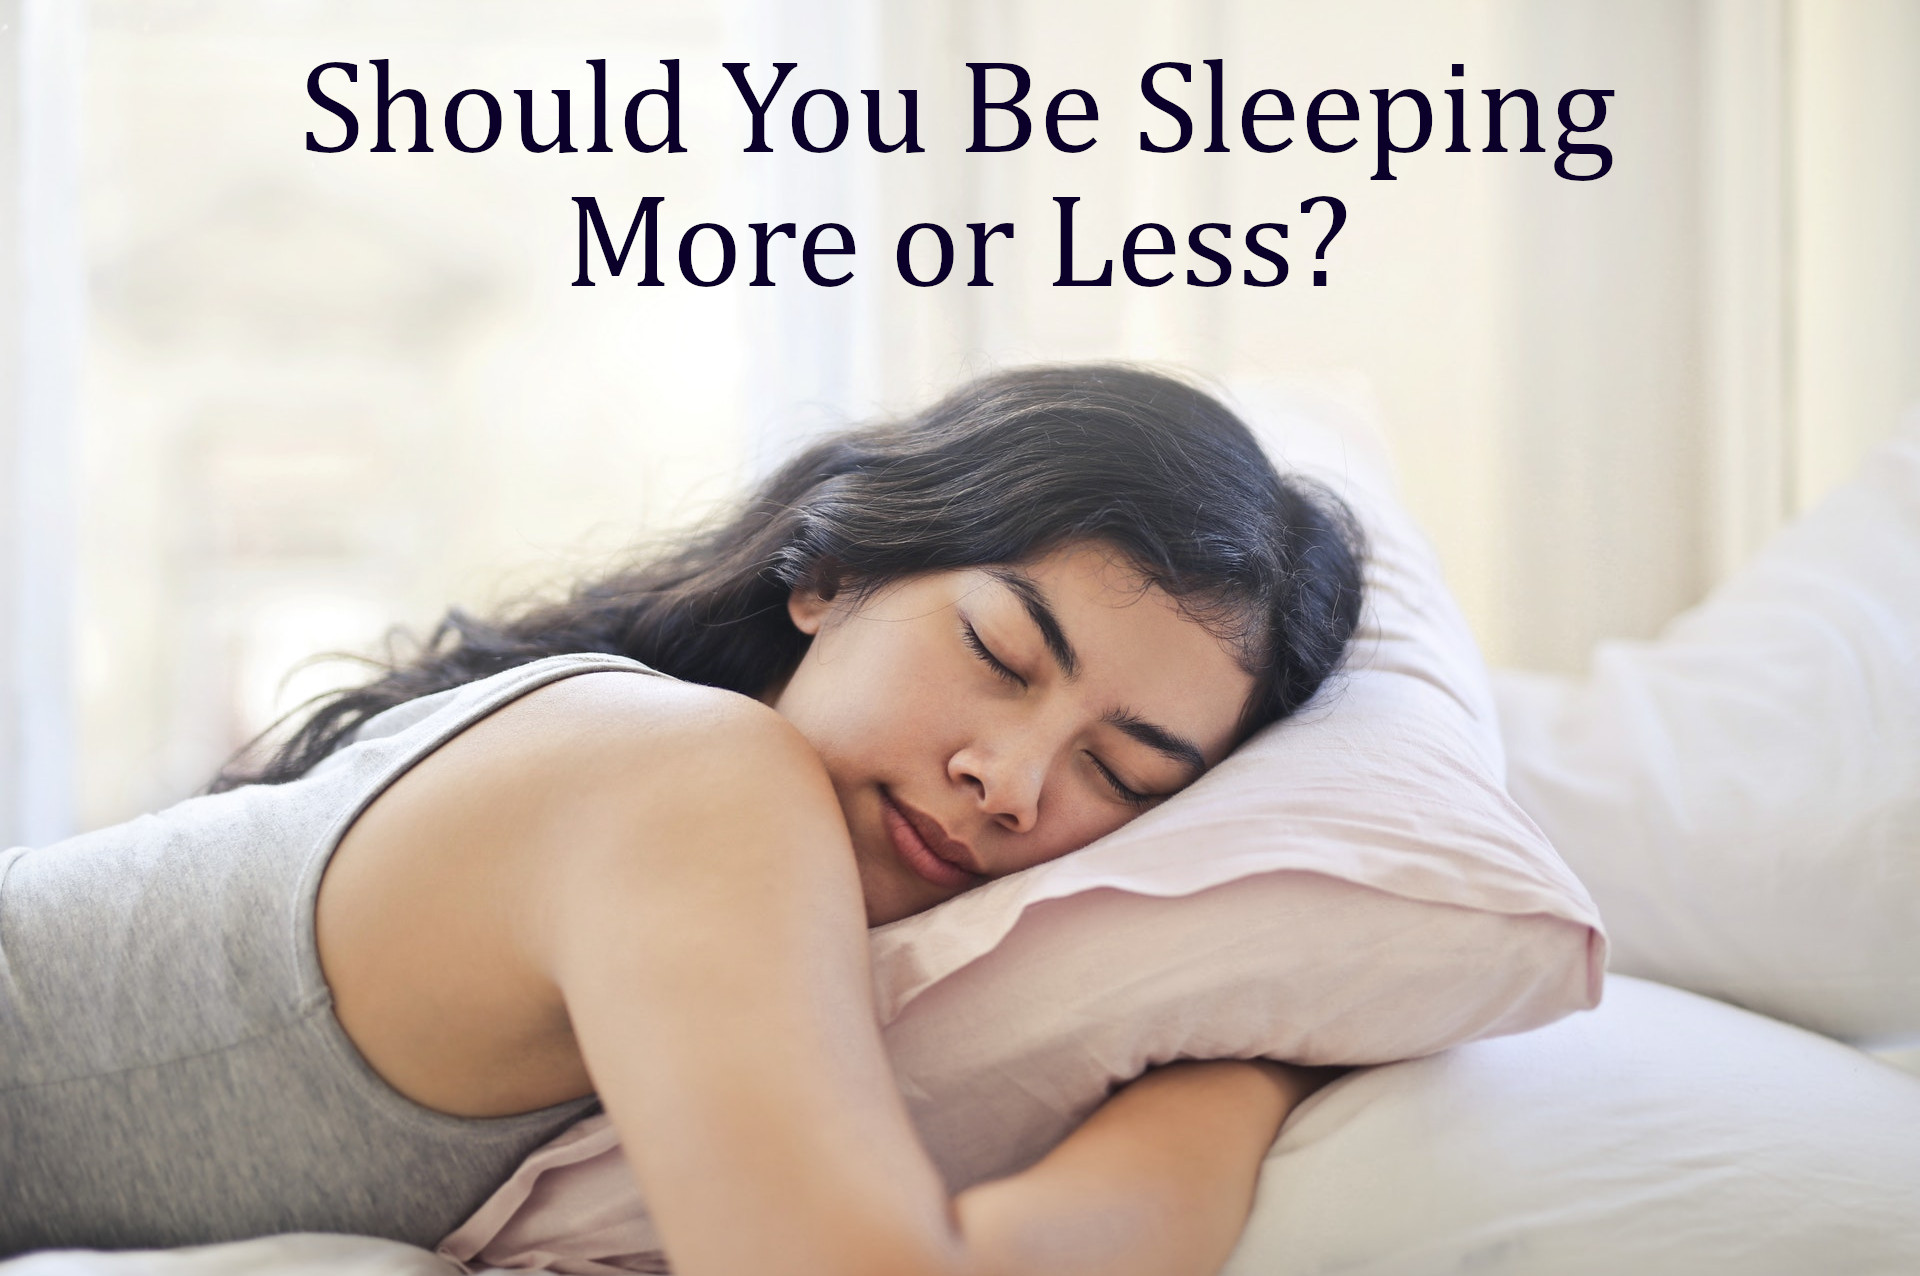 should you be sleeping more or less?